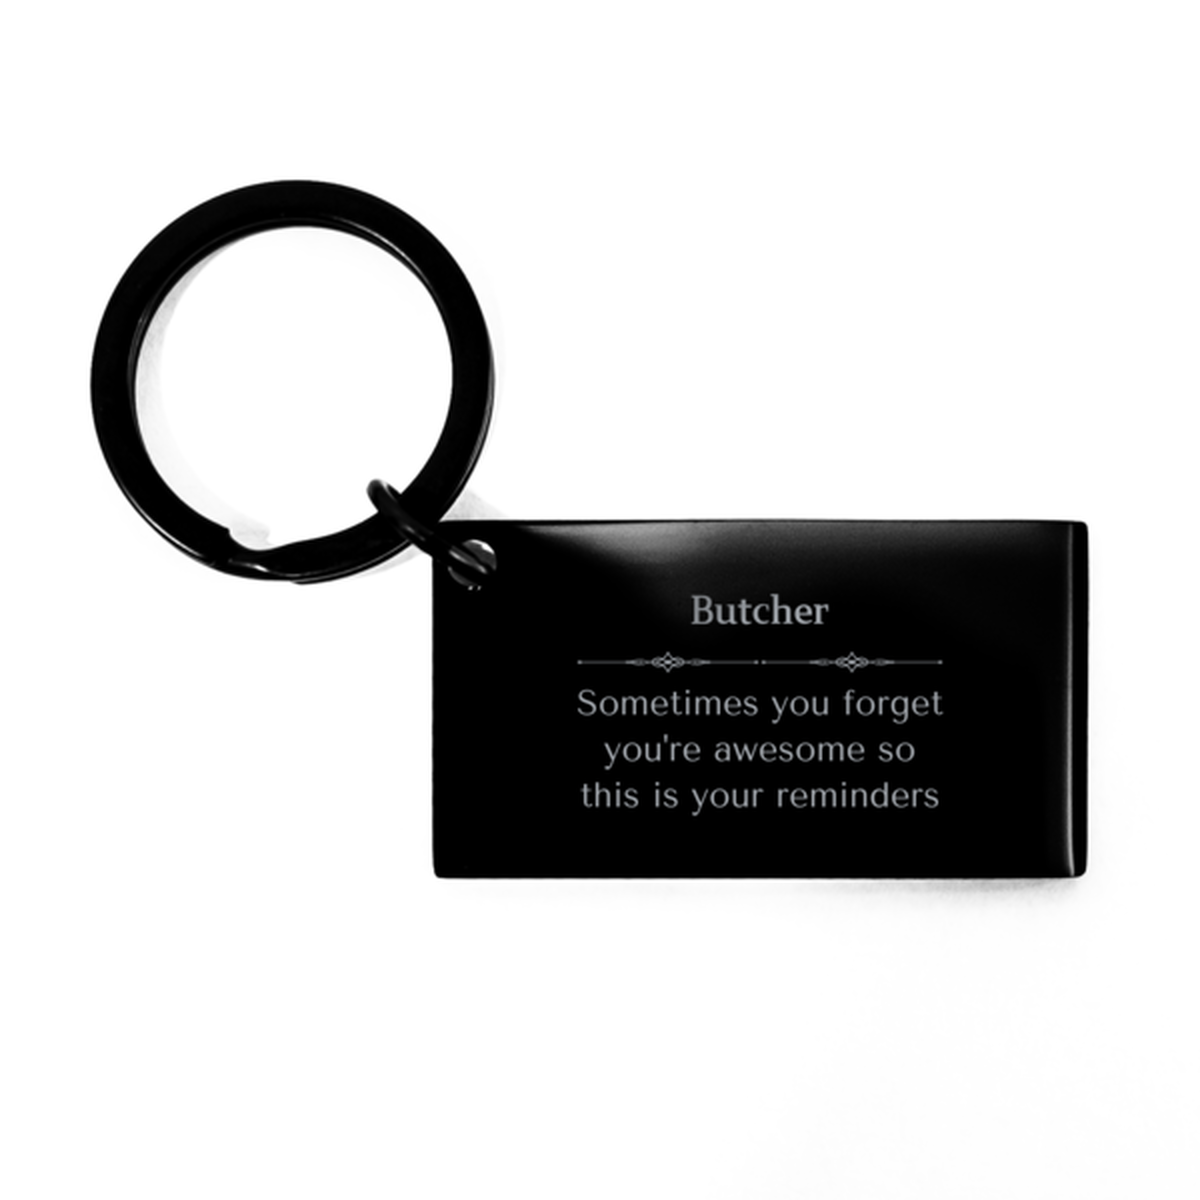 Sentimental Butcher Keychain, Dealer Sometimes you forget you're awesome so this is your reminders, Graduation Christmas Birthday Gifts for Butcher, Men, Women, Coworkers